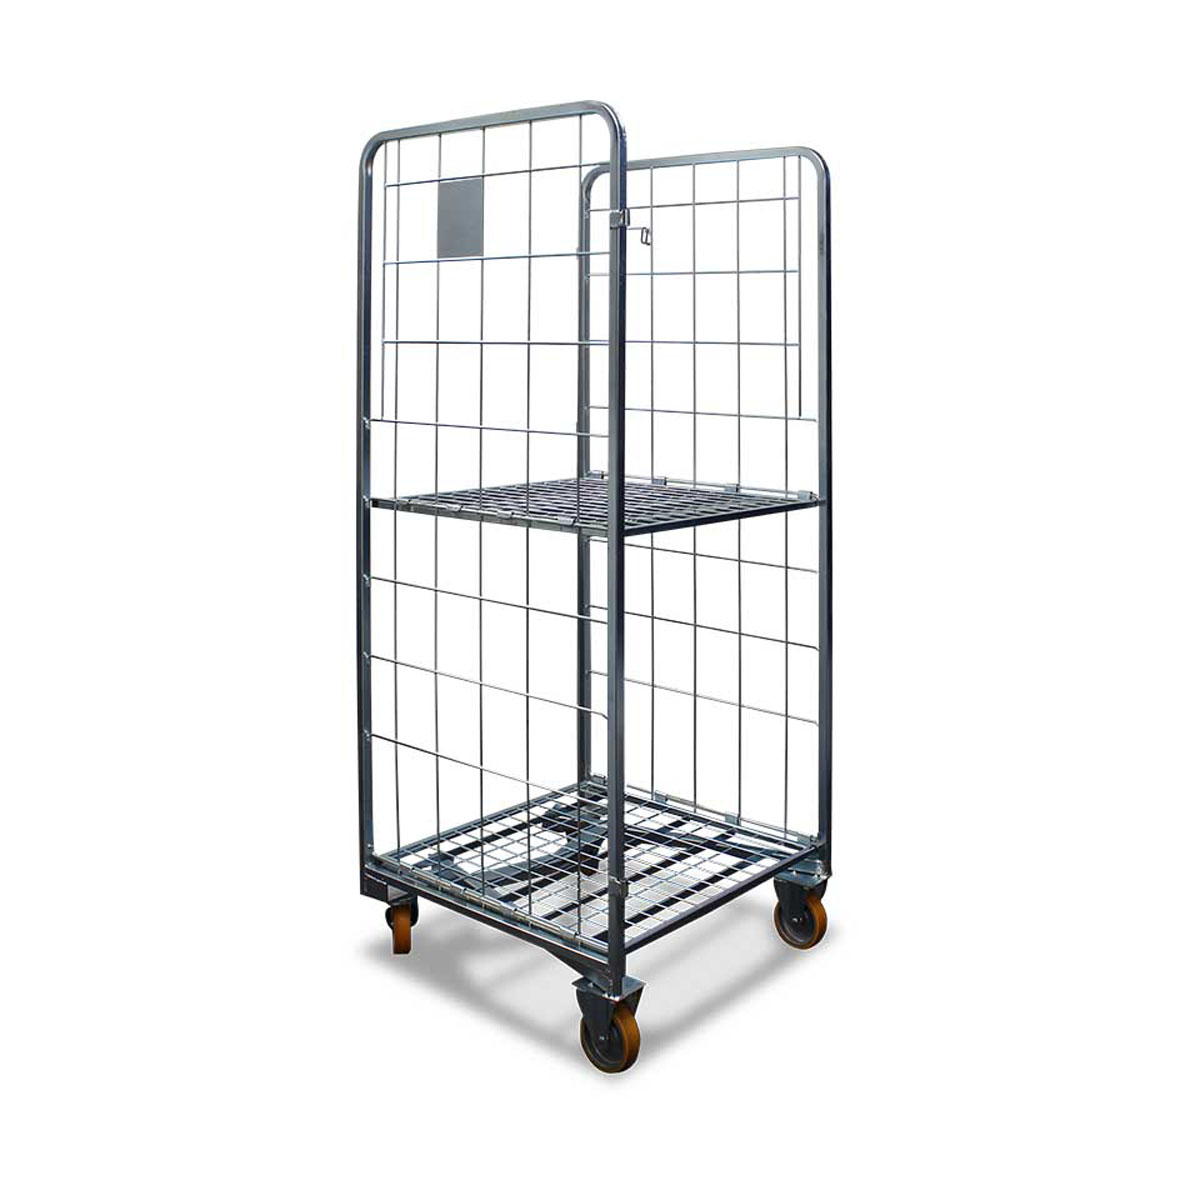 2 Sided Cage Trolley